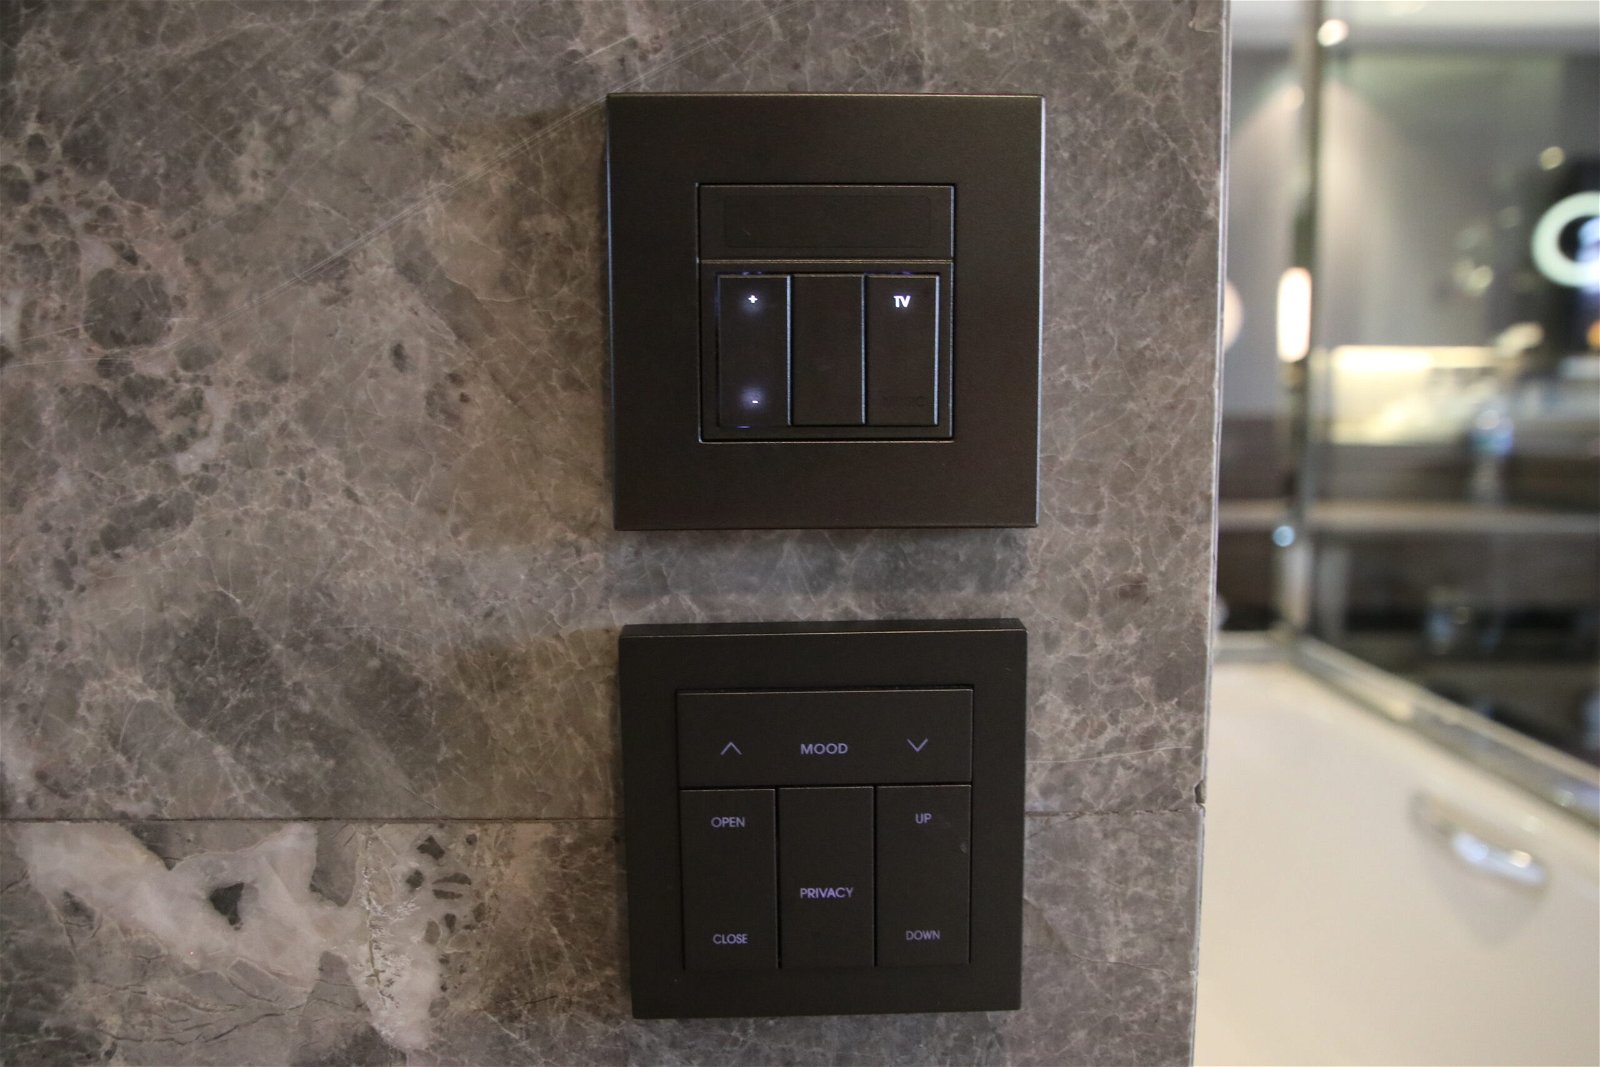 Music controls in the bathroom?!